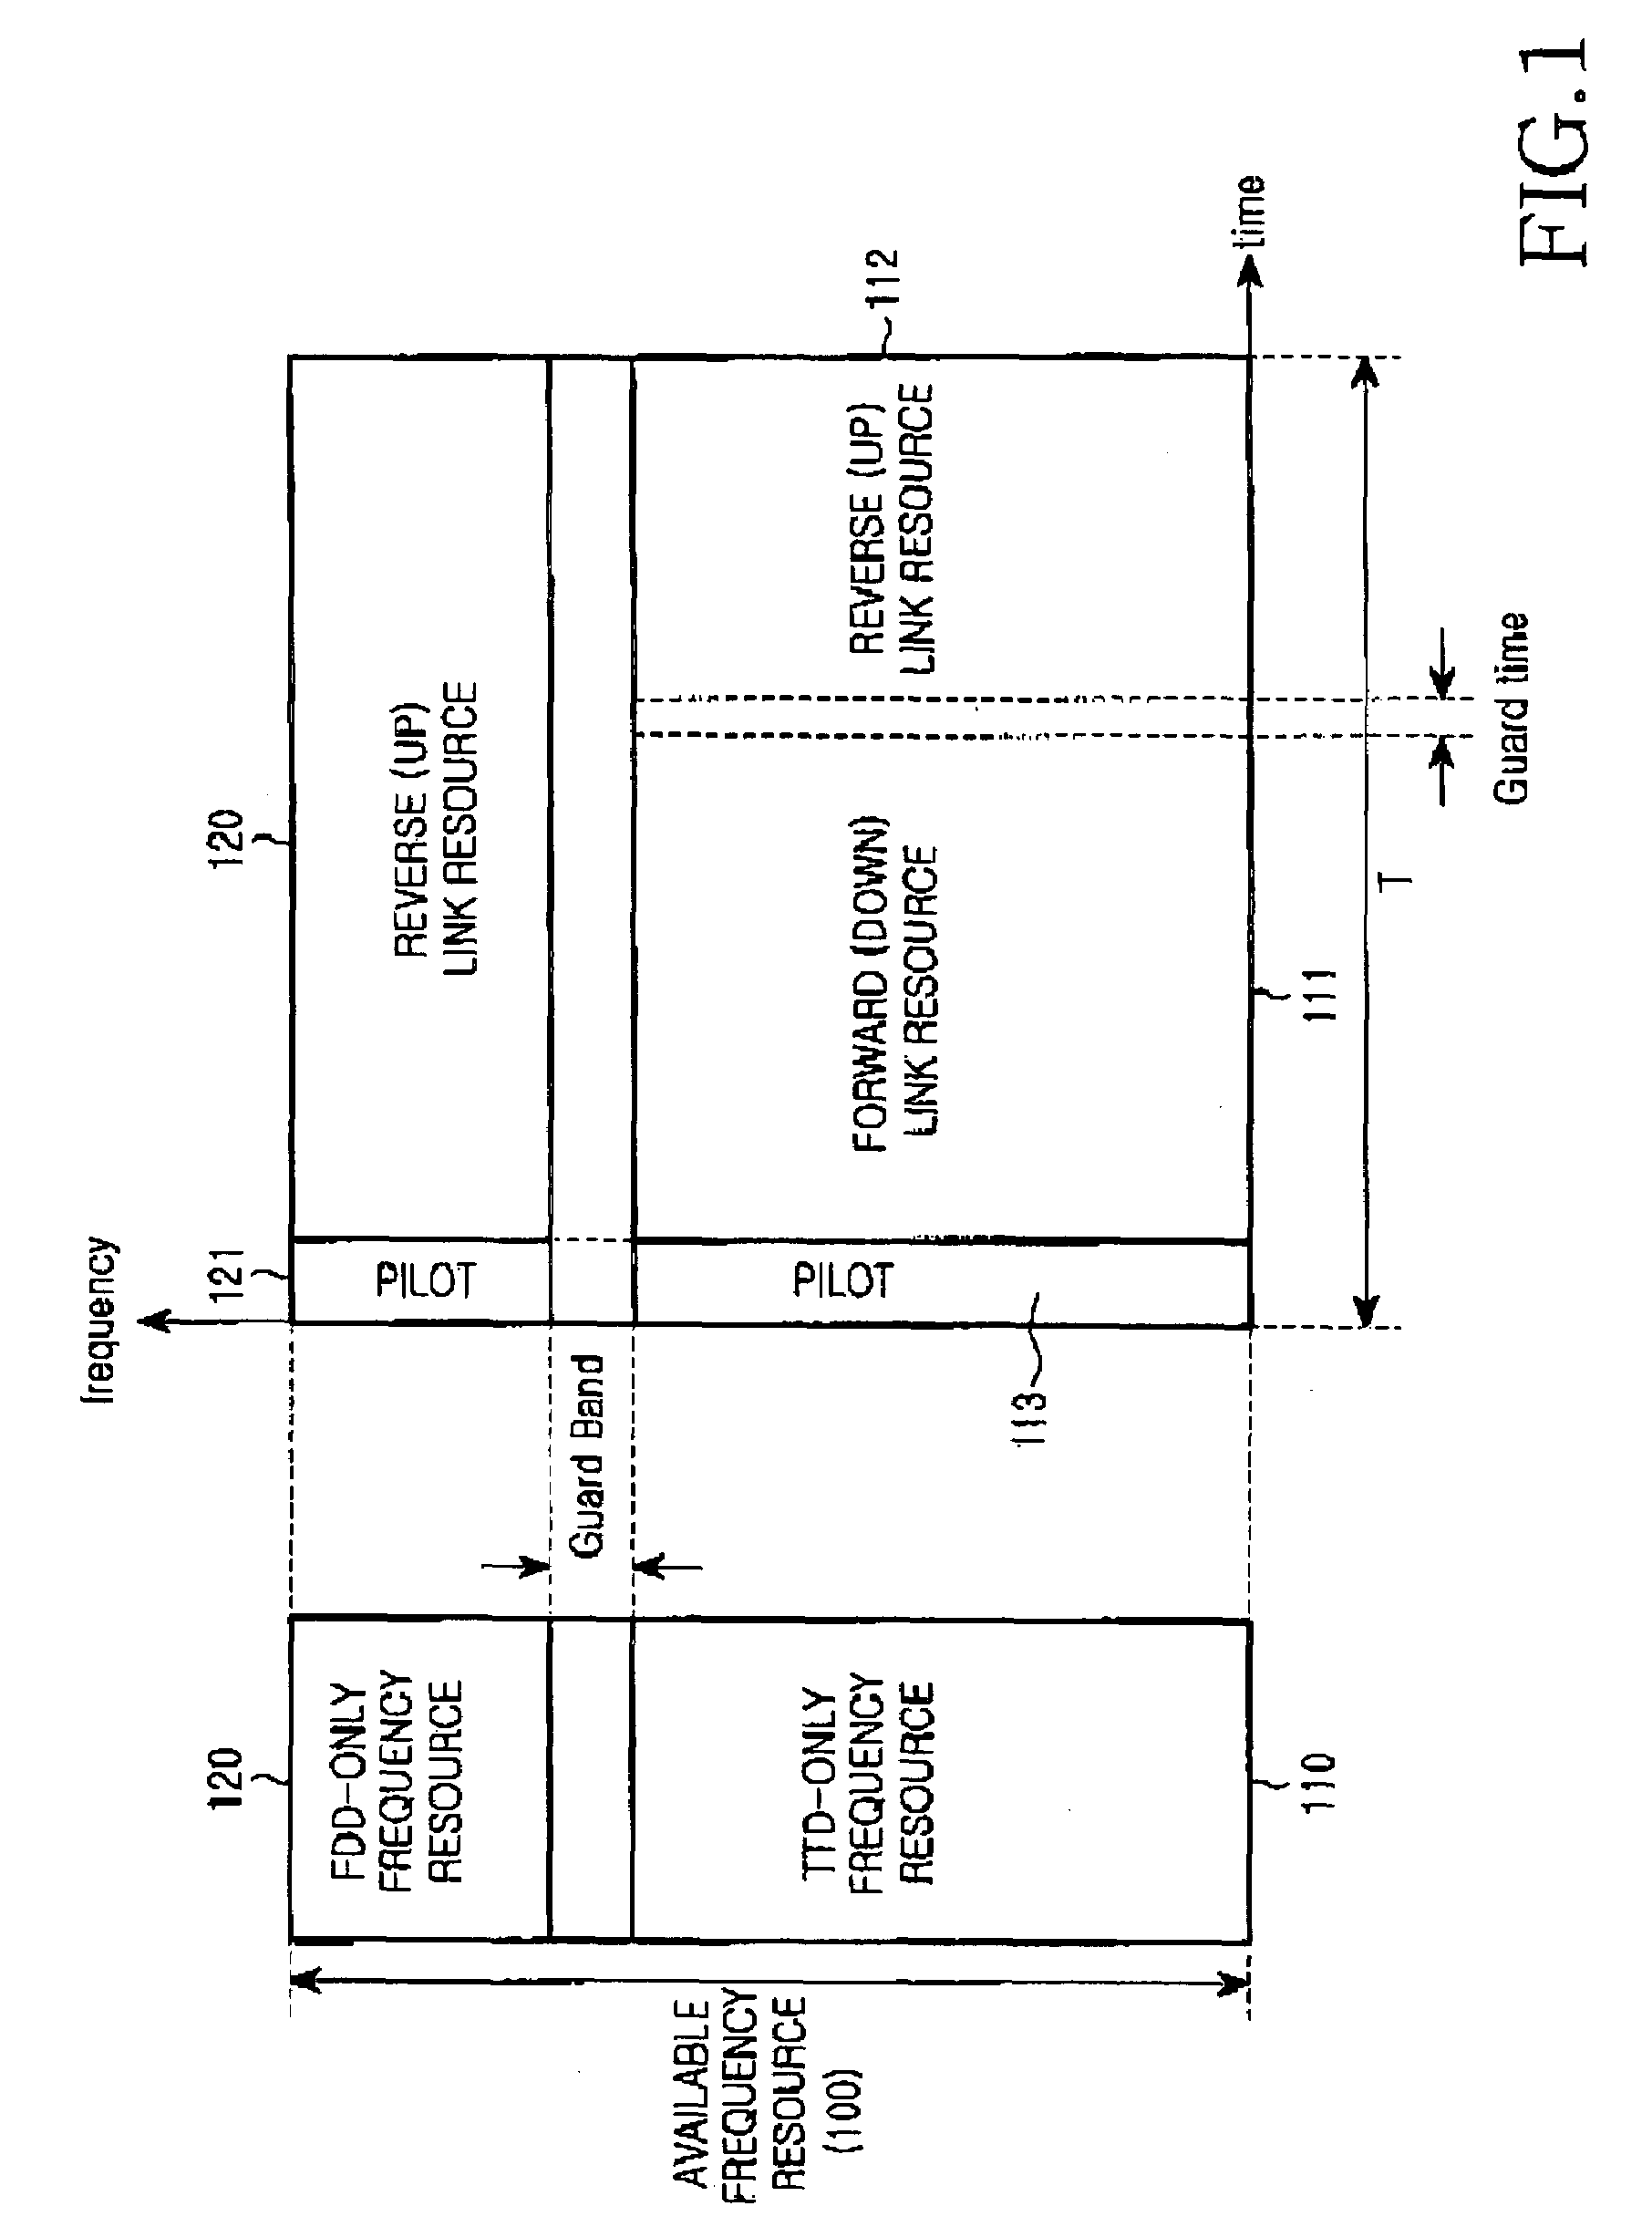 Control system and multiple access method in wireless communication system